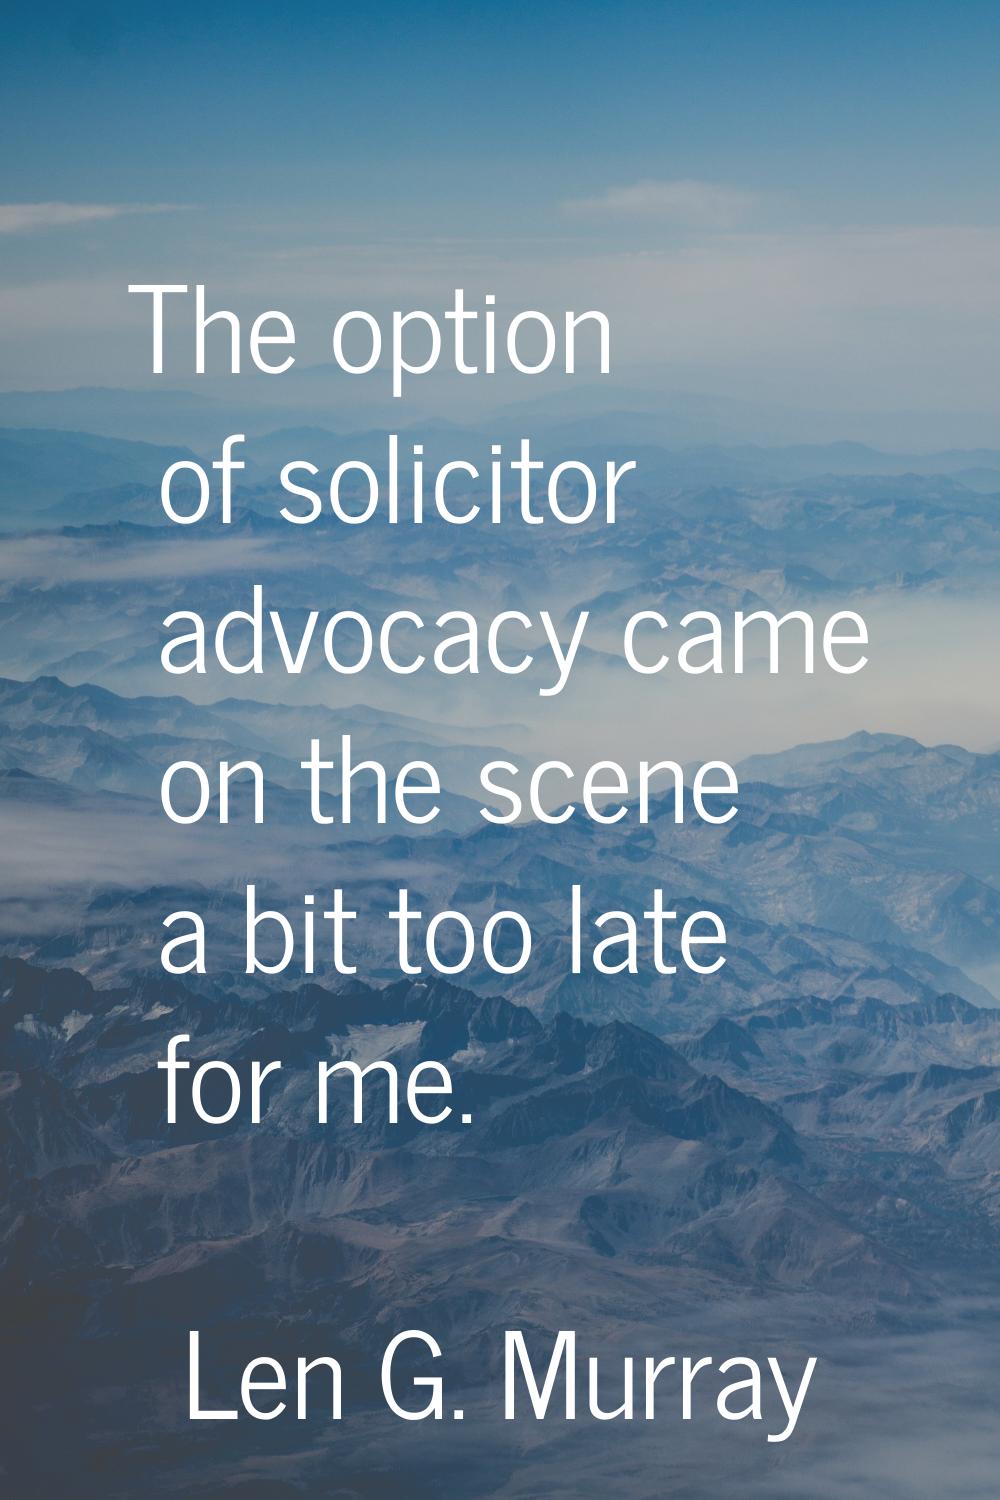 The option of solicitor advocacy came on the scene a bit too late for me.